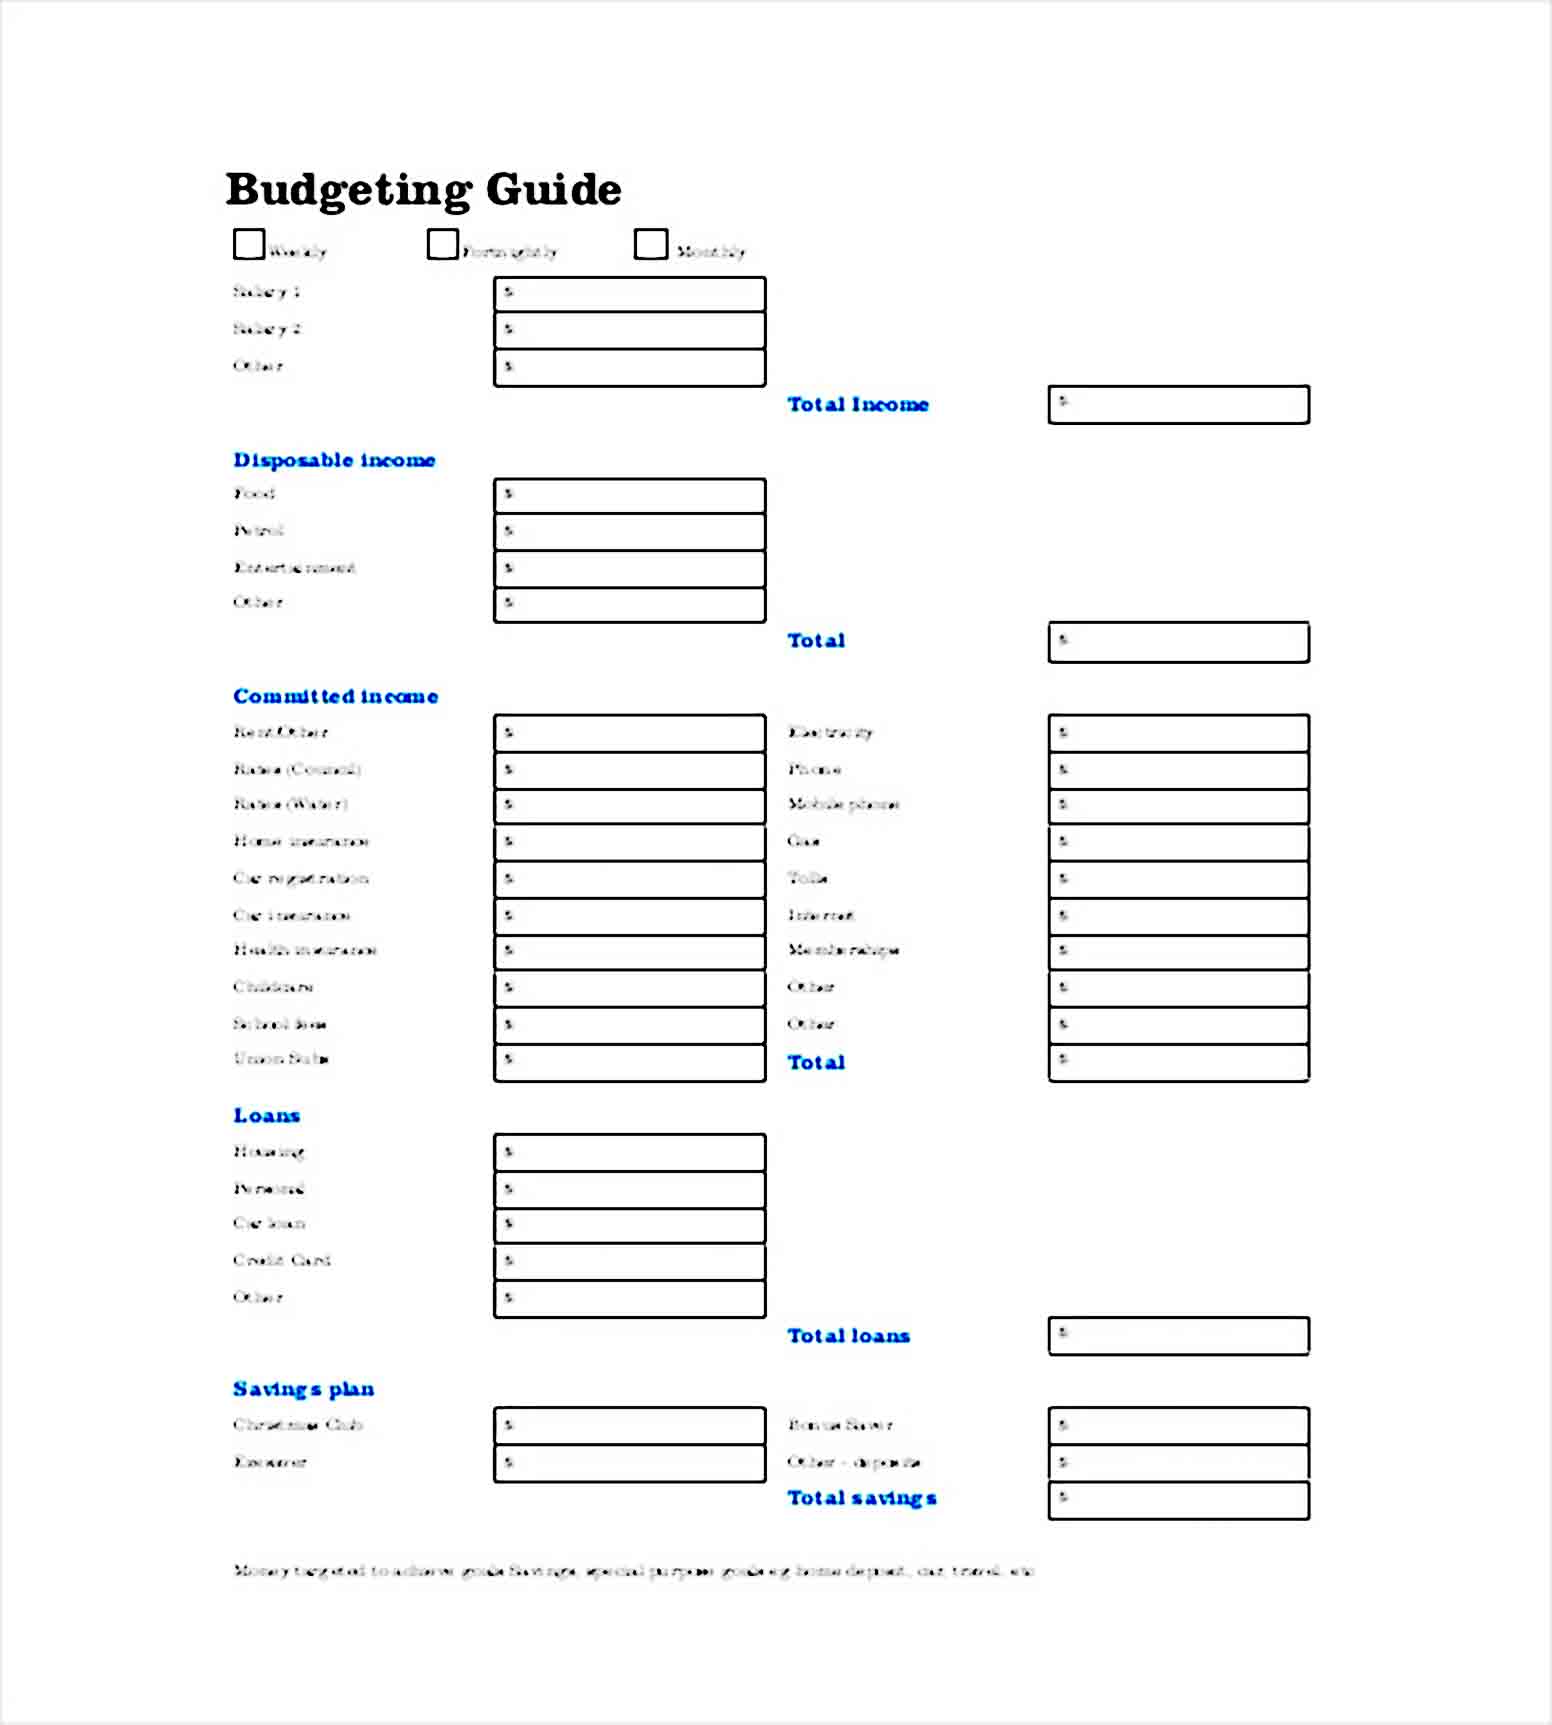 Weekly Budget Planner Template